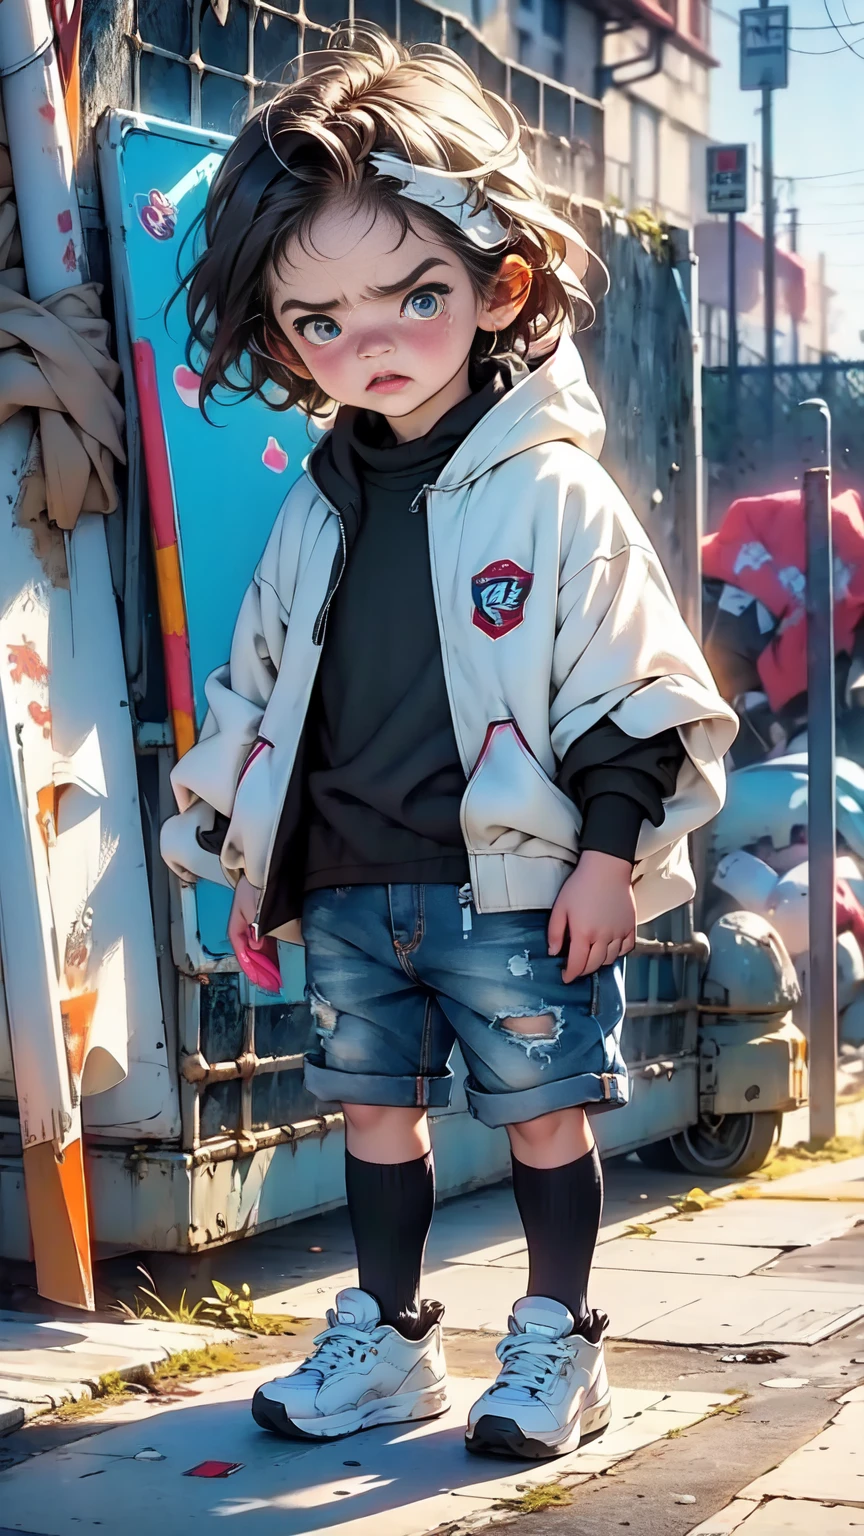 Anime, Long shot, full body:1.5, (5 year old boy:1.4, upset, angry:1.4), hyper realism, skin texture, highly detailed, 8K HD, cute, emotional expression, tears, messy hair, dirty clothes, ice cream spilled on the ground, outdoor park, bright sunlight, detailed background, cinematic lighting, vibrant colors